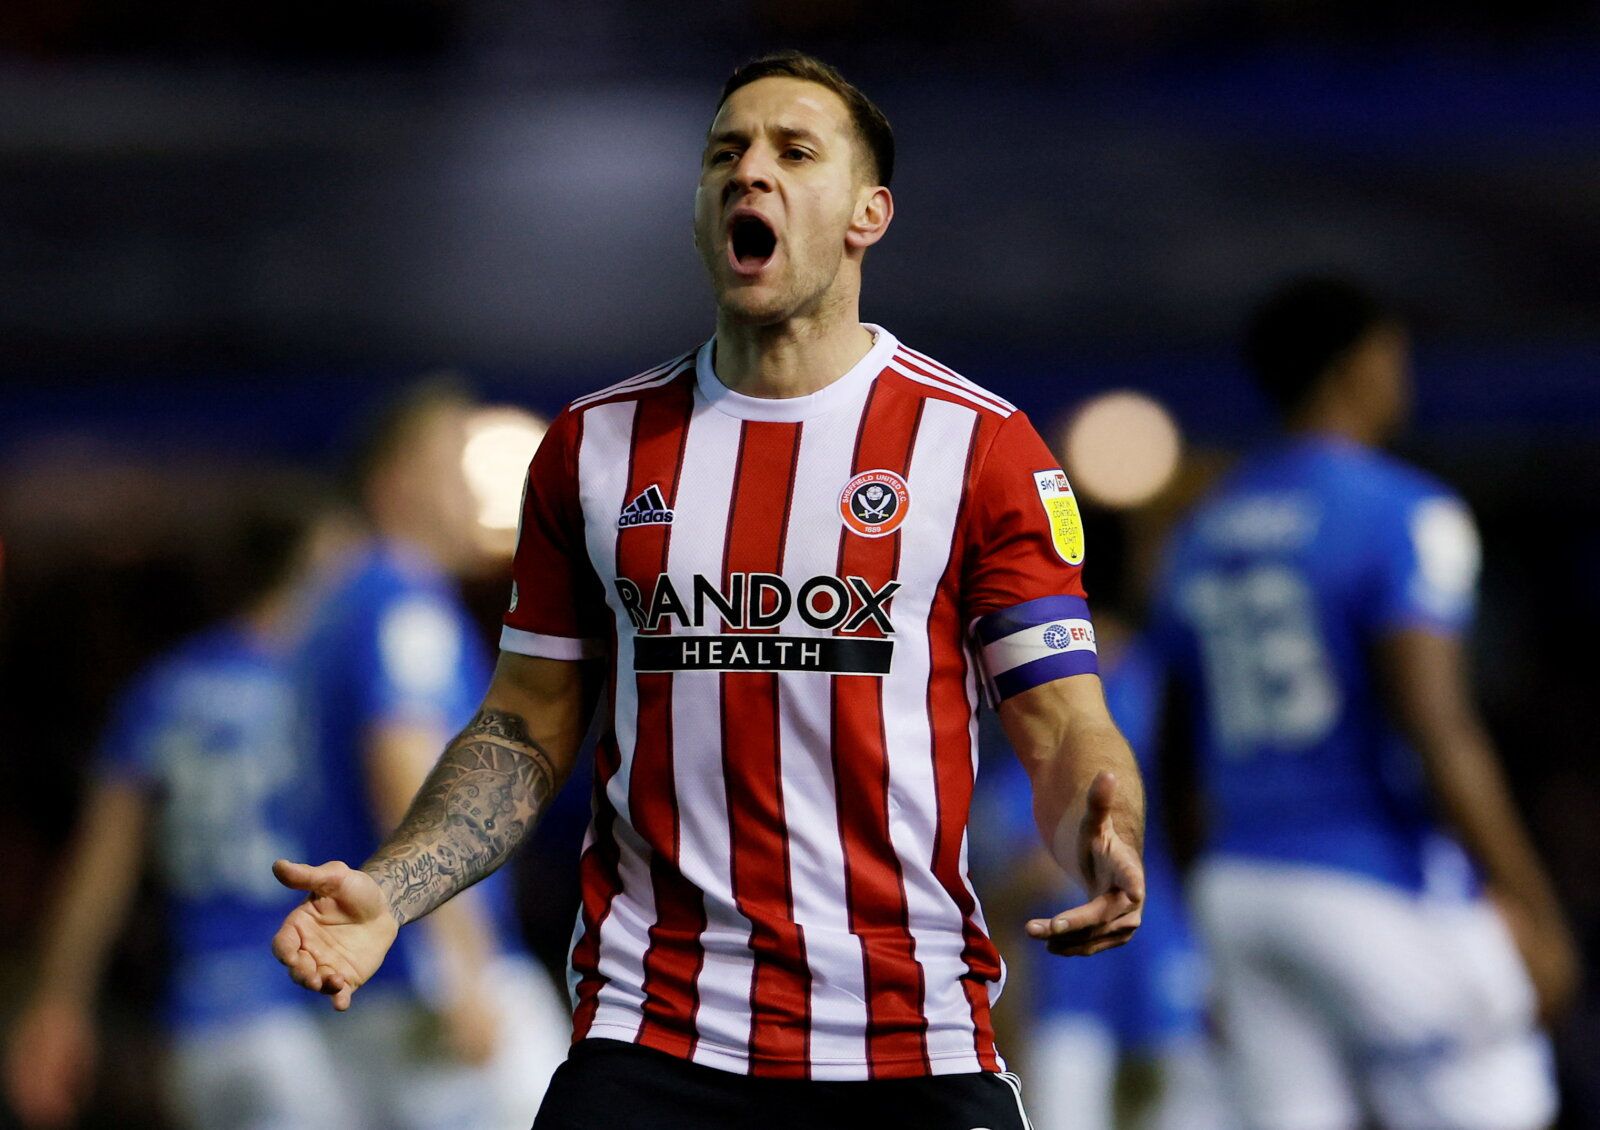 Soccer Football - Championship - Birmingham City v Sheffield United - St Andrew's, Birmingham, Britain - February 4, 2022 Sheffield United's Billy Sharp celebrates scoring their first goal  Action Images/Jason Cairnduff  EDITORIAL USE ONLY. No use with unauthorized audio, video, data, fixture lists, club/league logos or 'live' services. Online in-match use limited to 75 images, no video emulation. No use in betting, games or single club /league/player publications. Please contact your account re